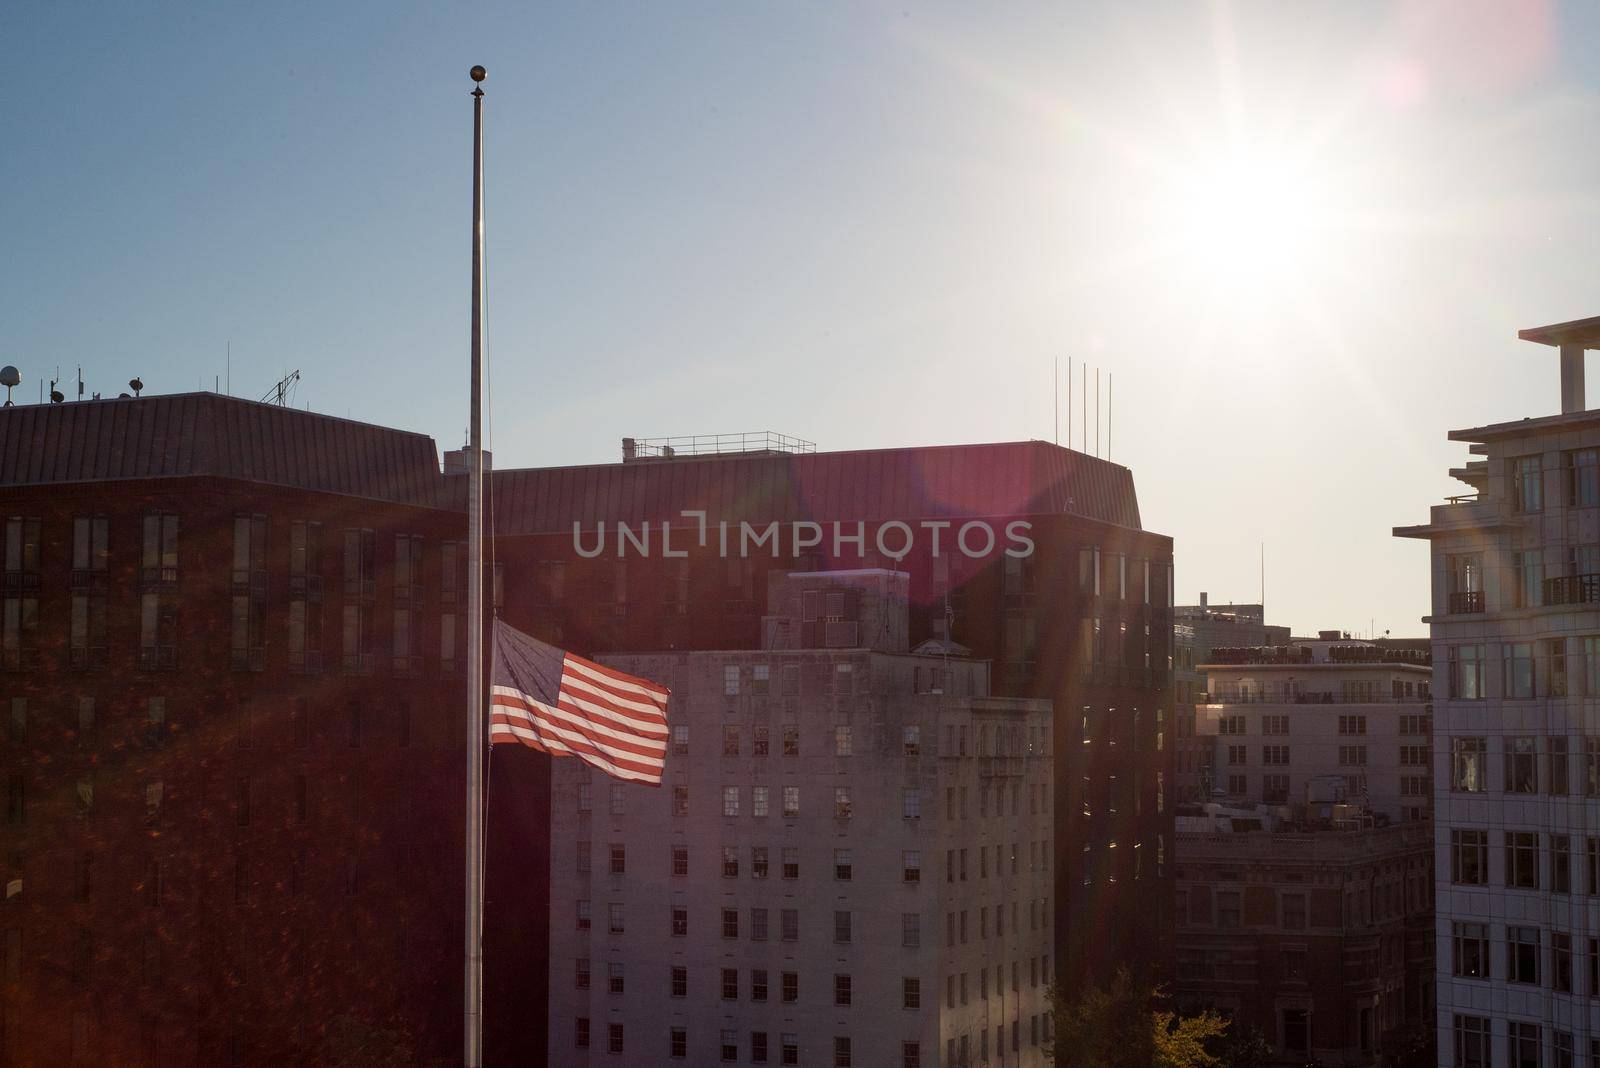 US flag flying at half mast during sunset in Washington DC by jyurinko